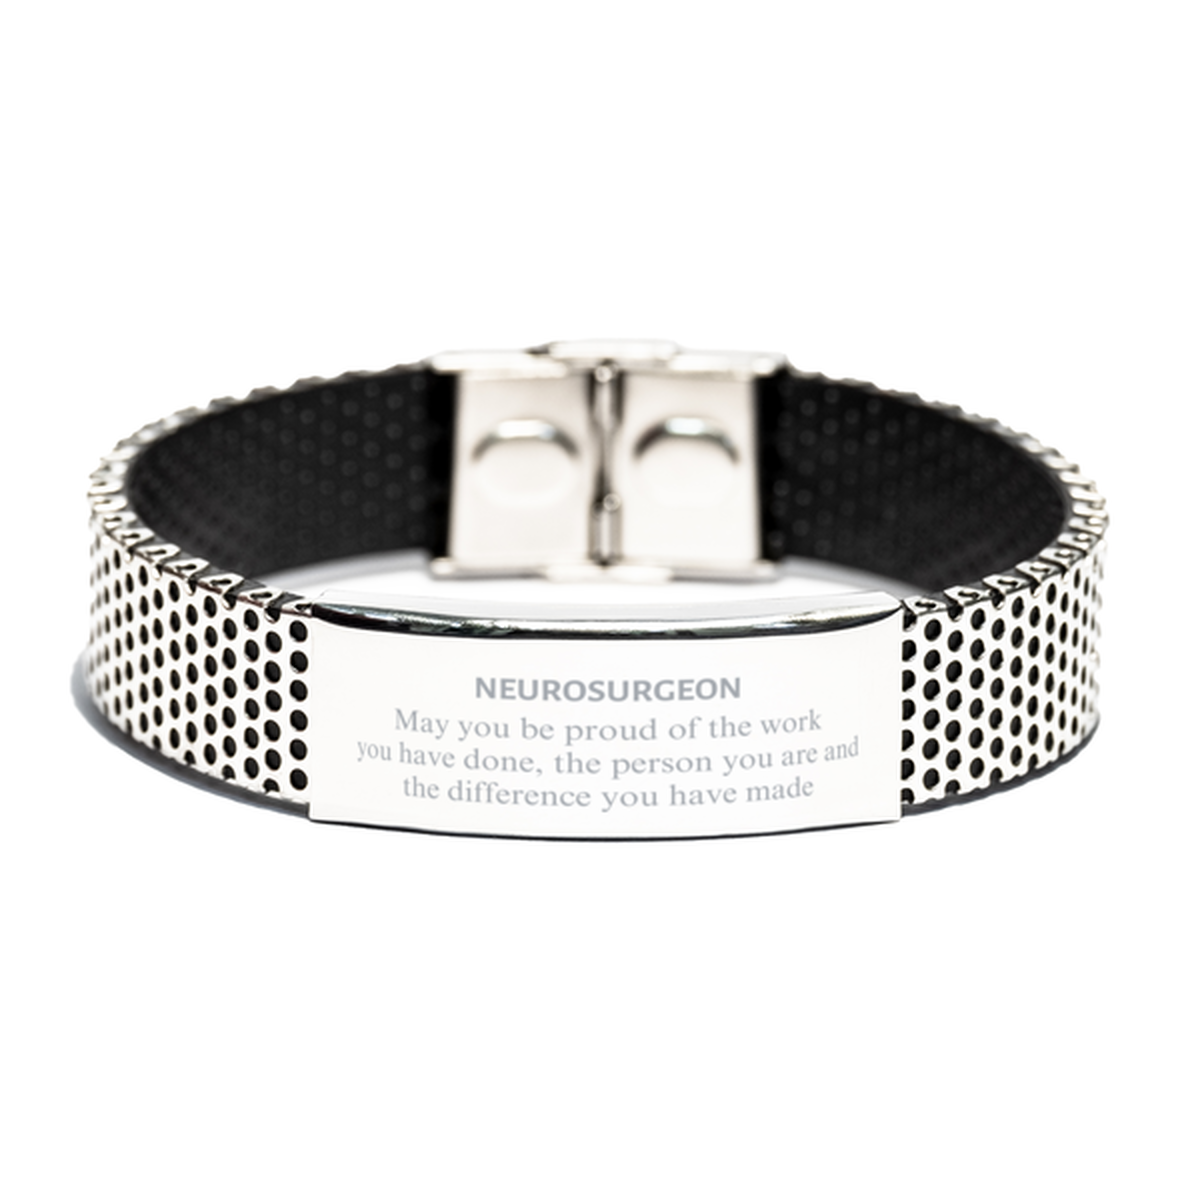 Neurosurgeon May you be proud of the work you have done, Retirement Neurosurgeon Stainless Steel Bracelet for Colleague Appreciation Gifts Amazing for Neurosurgeon